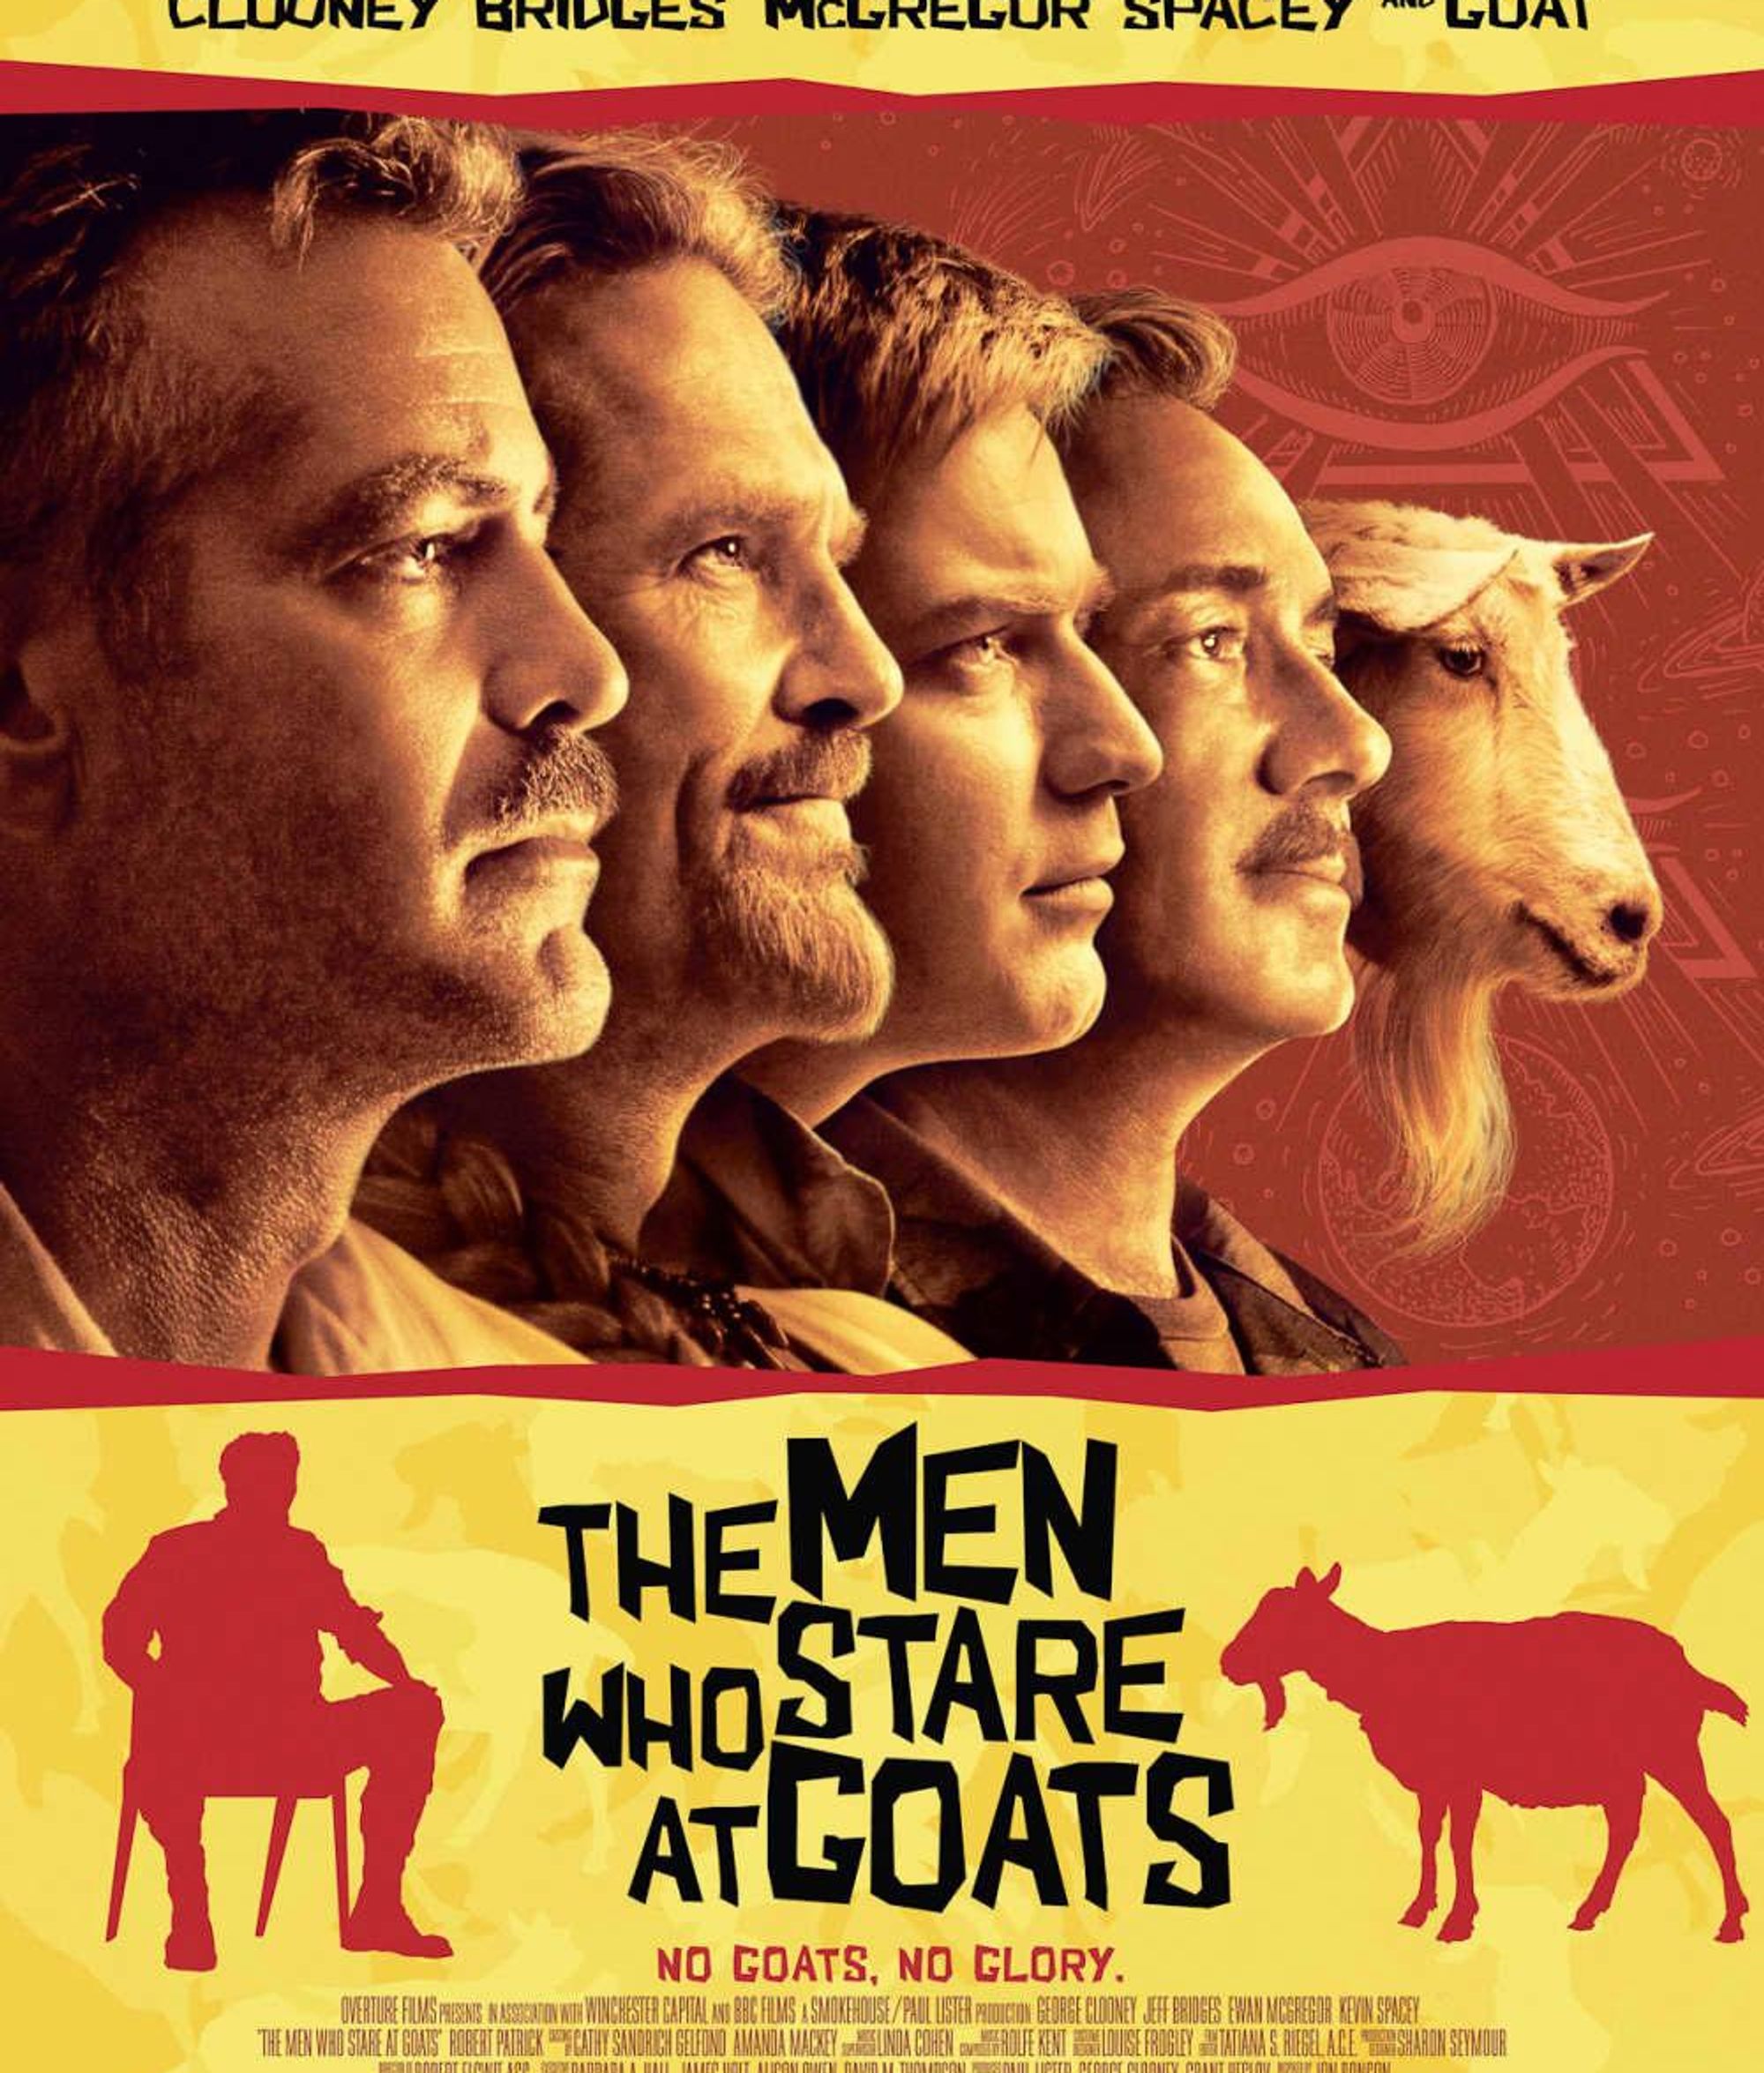 News_The Men Who Stare at Goats_promo poster